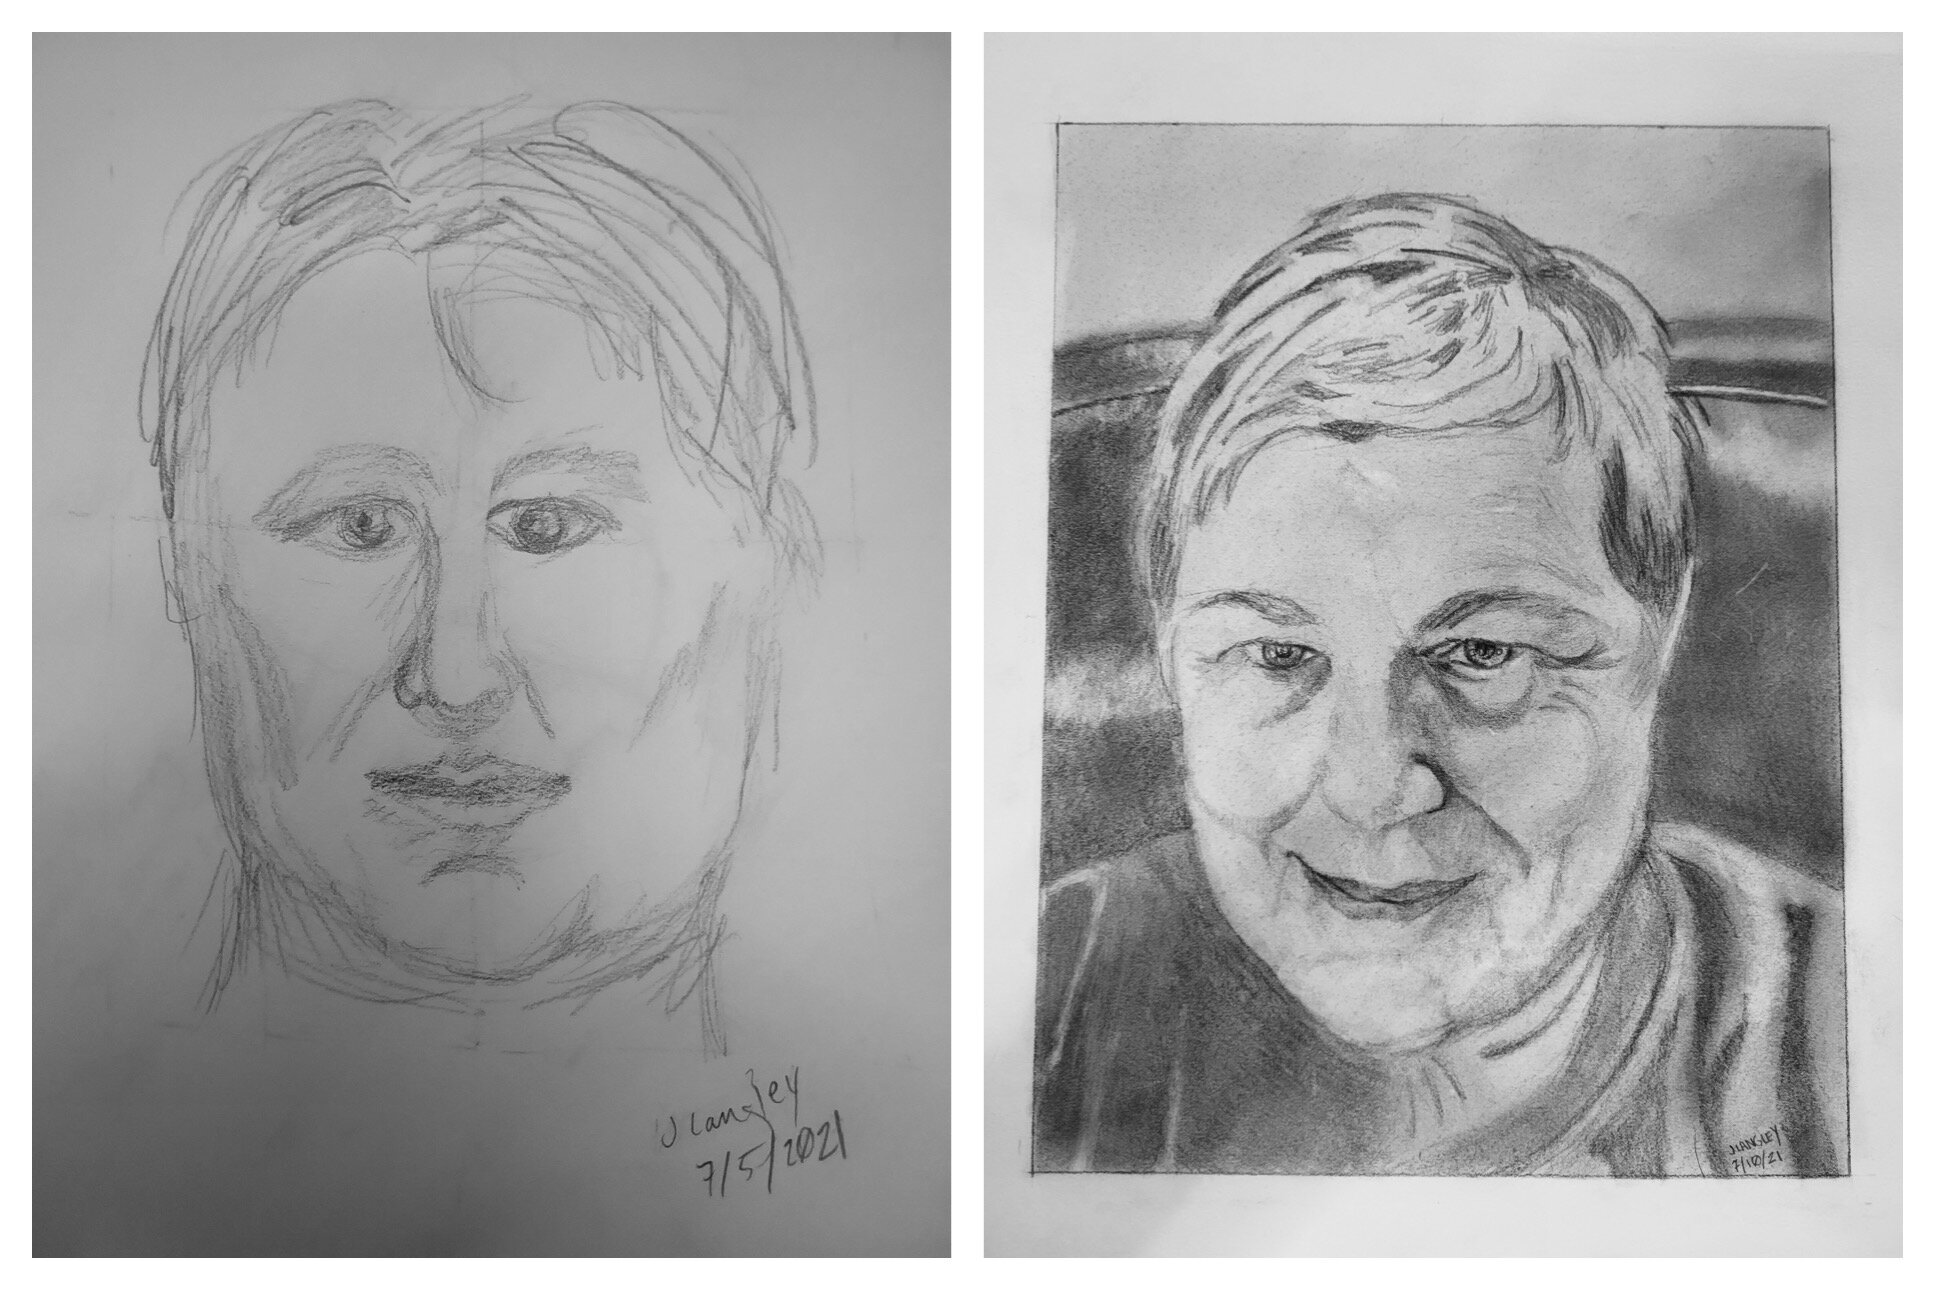 Jennifer's before and after self-portraits July 2021.